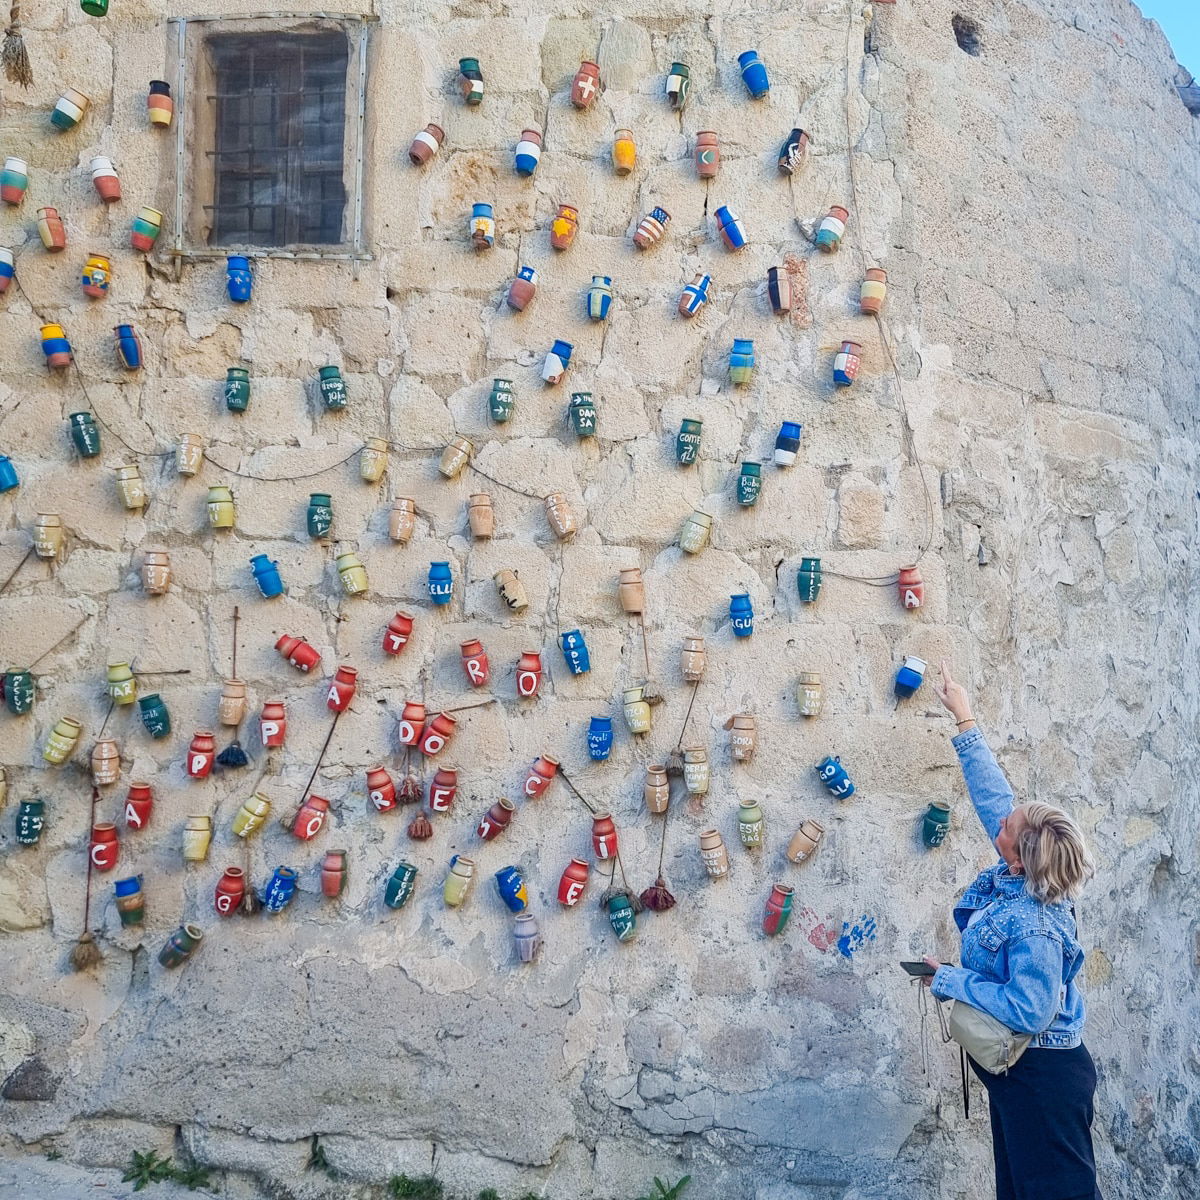 Sj paints on an old wall adorned with colorful hanging tin cans in an outdoor urban art project in Goreme, Cappadocia.